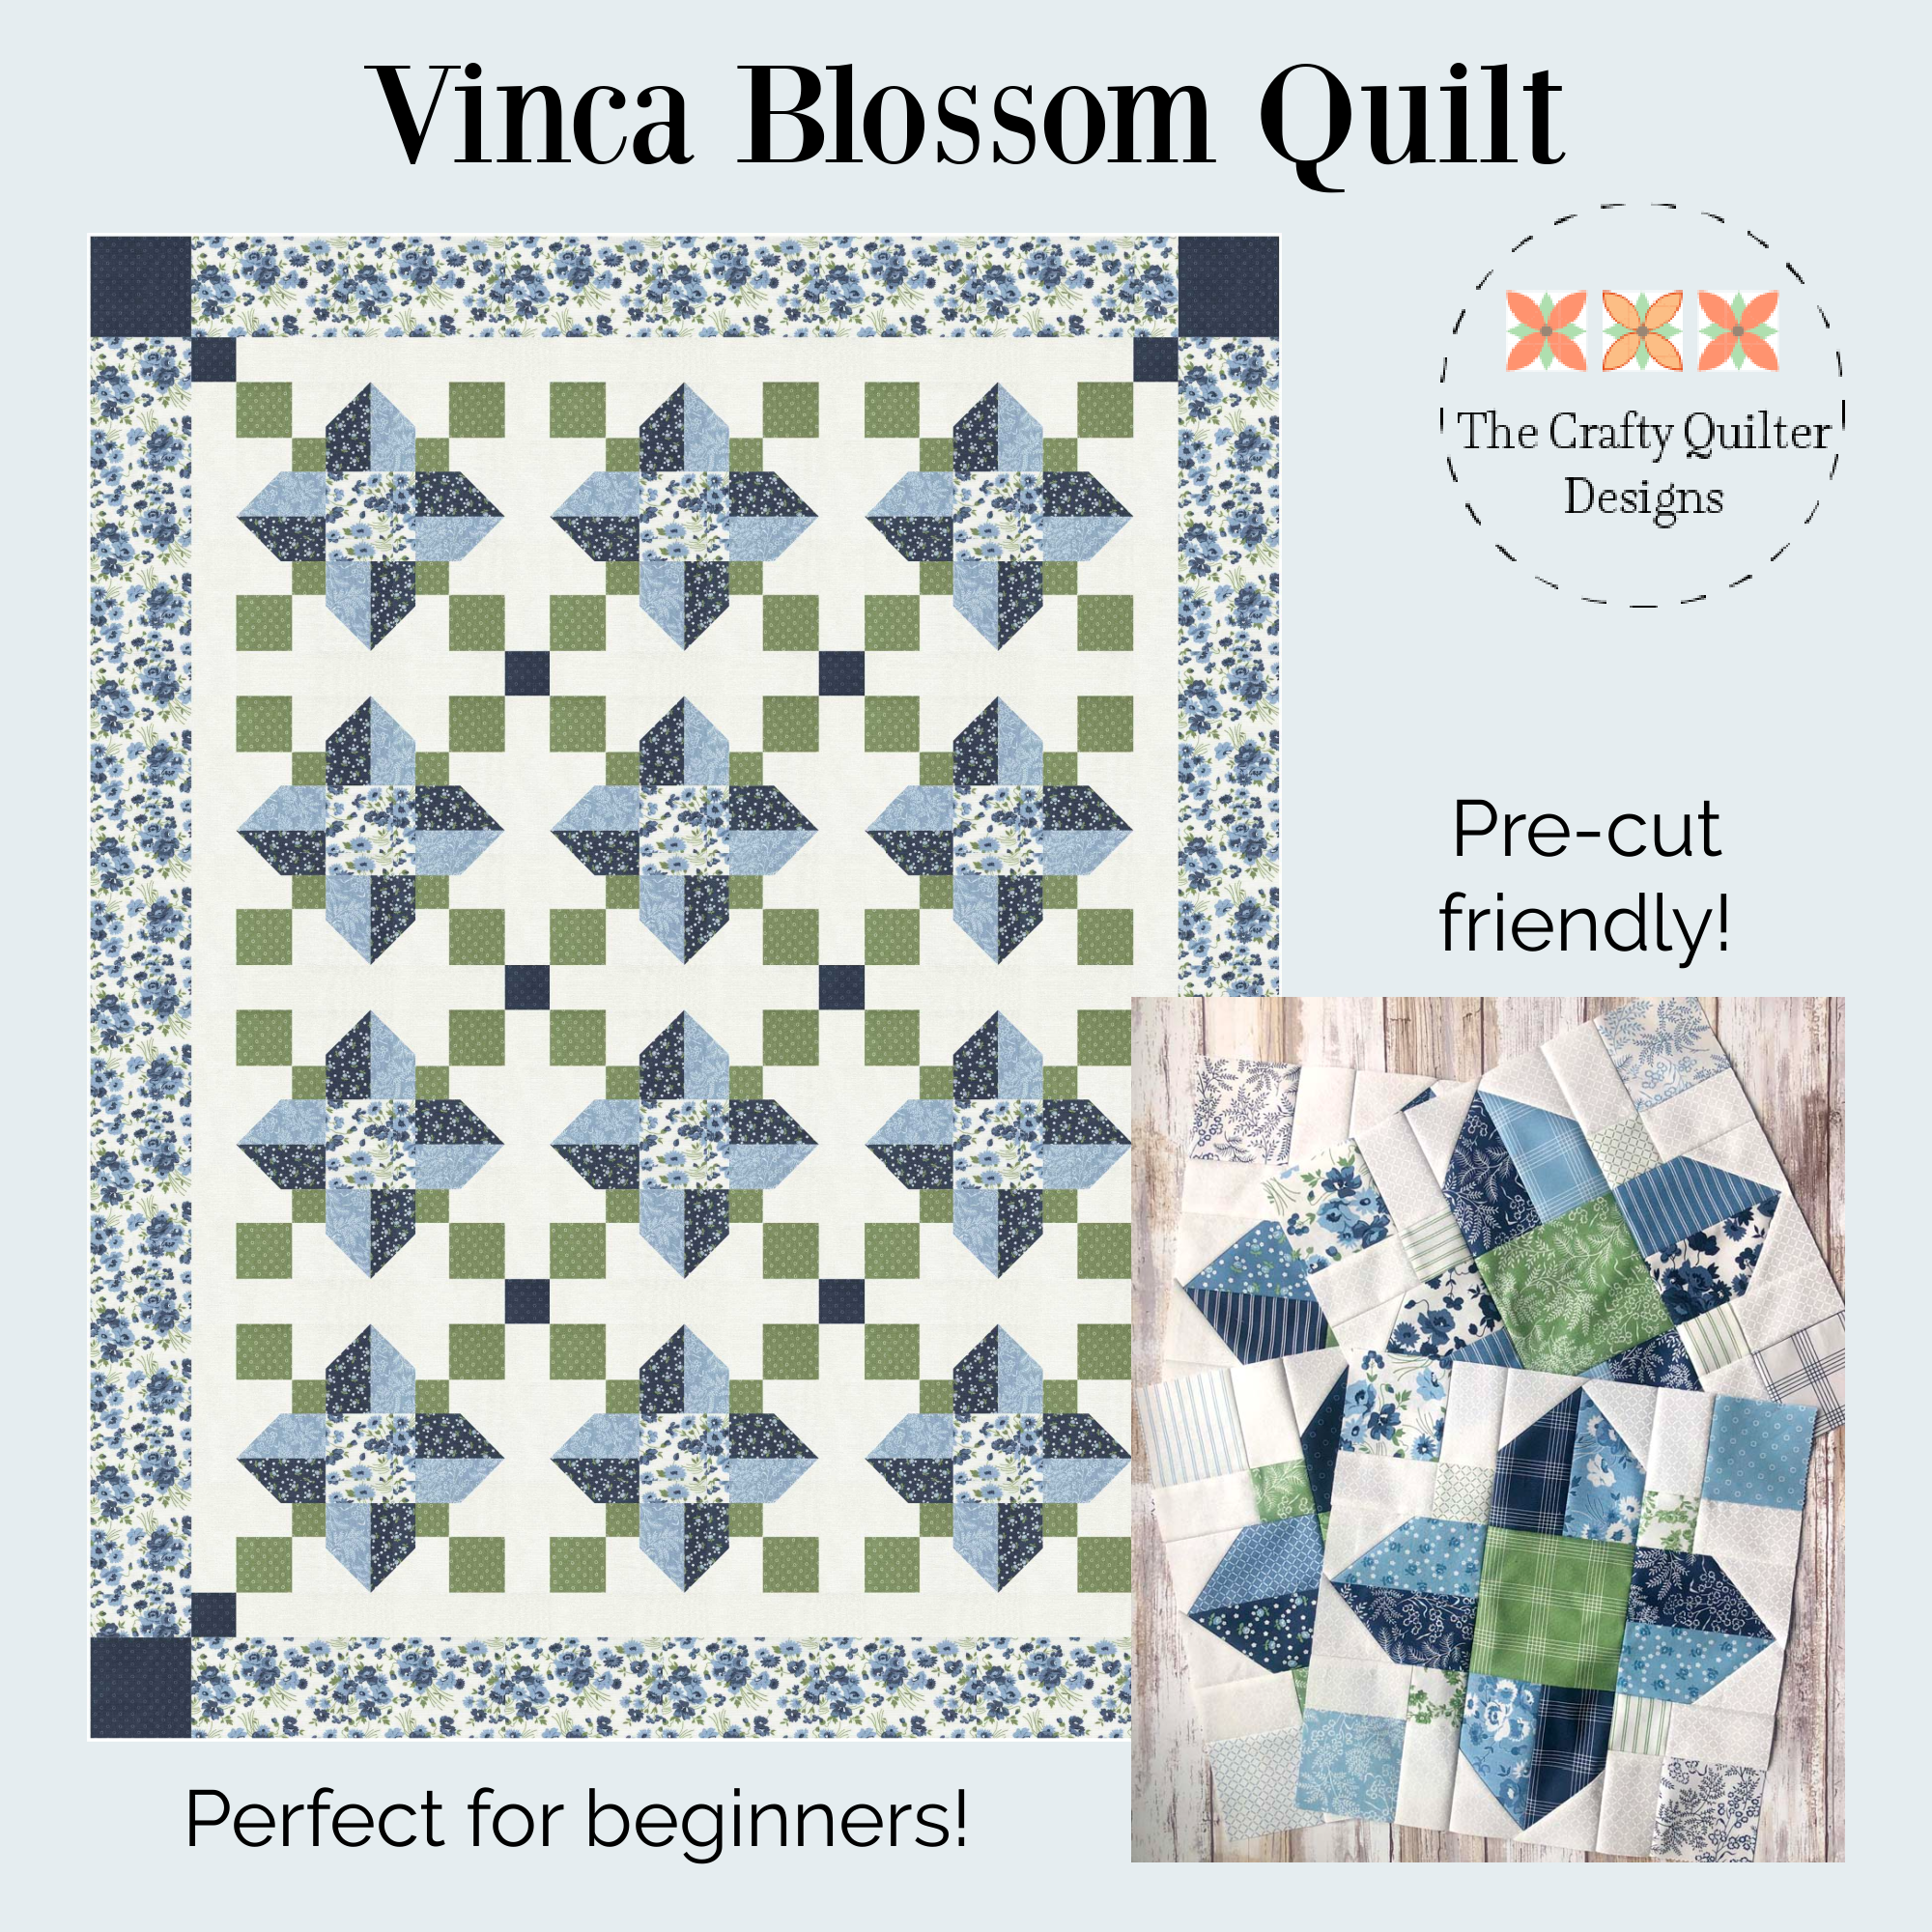 Vinca Blossom quilt pattern is available as a pdf on Etsy at CraftyQuilterDesigns.
It includes four size options, clear instructions and full color diagrams.